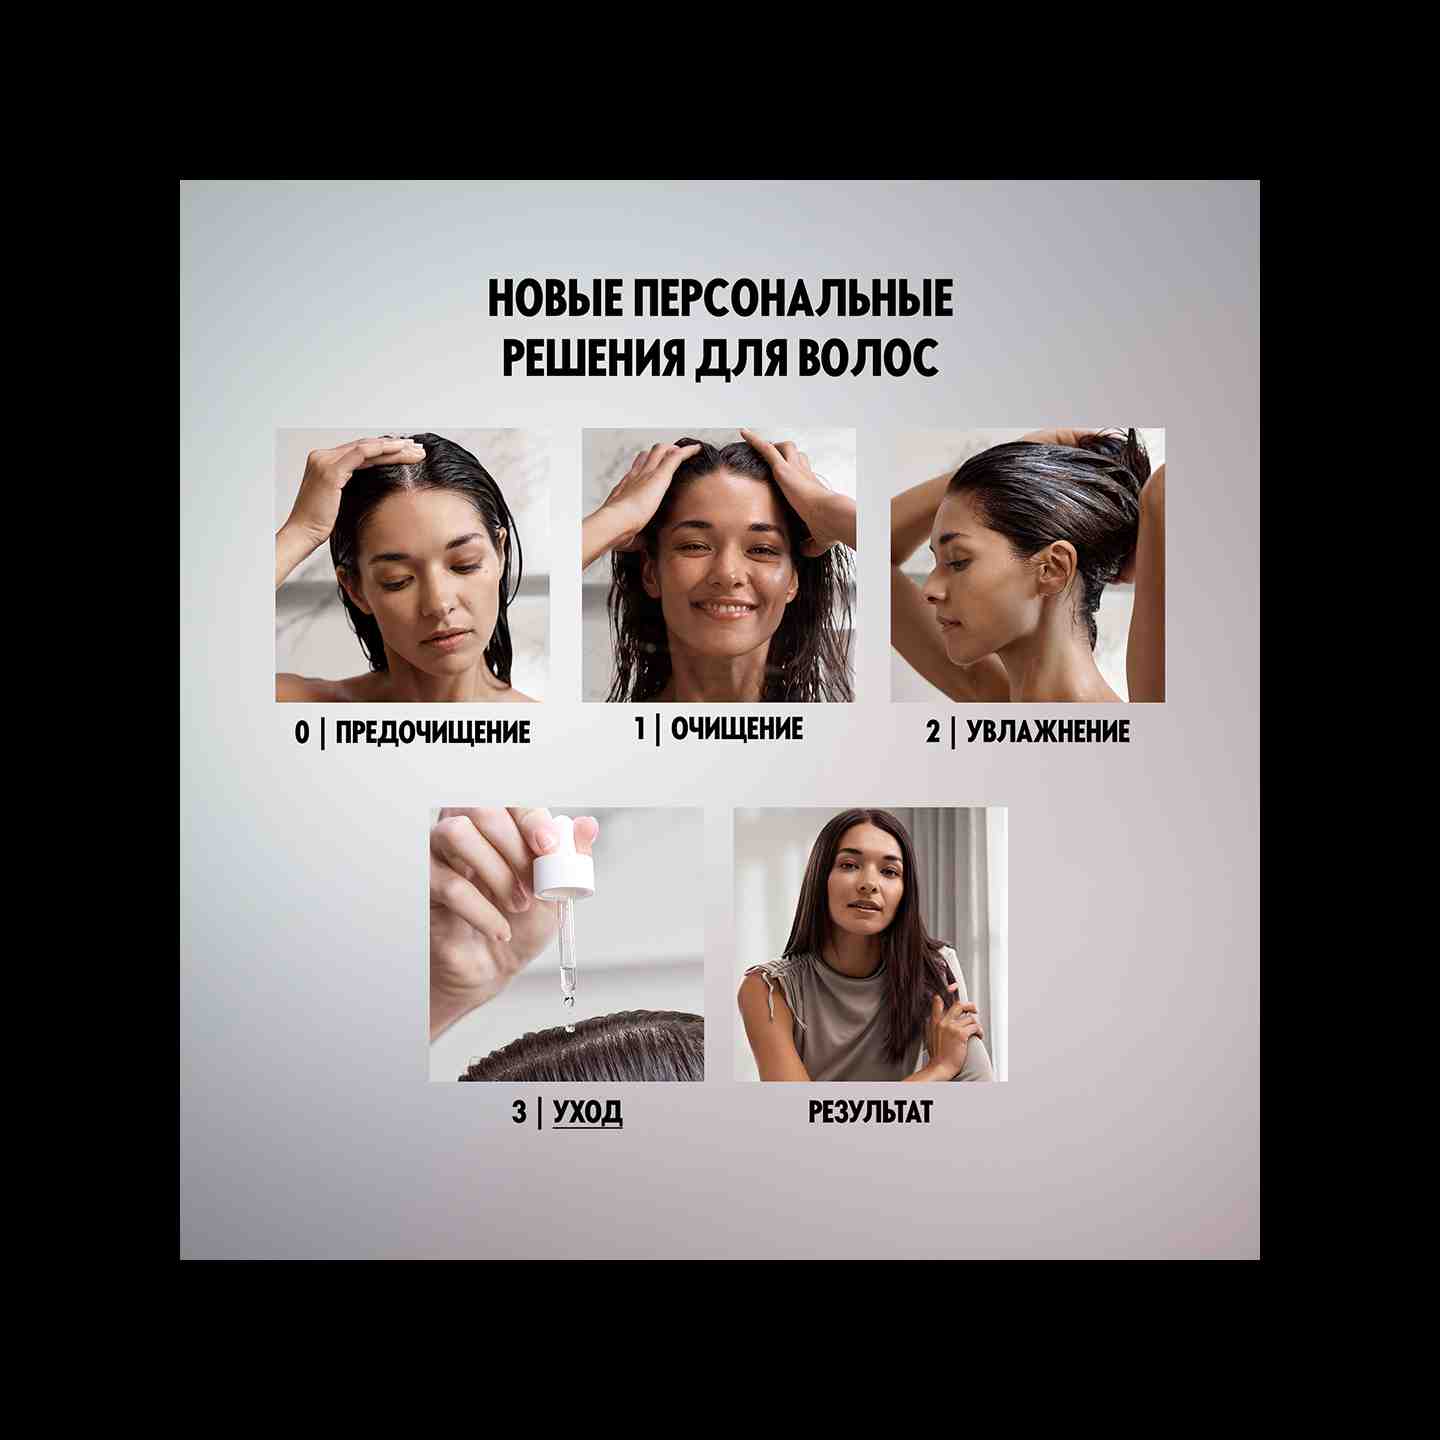 https://media-cdn.oriflame.com/productImage?externalMediaId=product-management-media%2fProducts%2f44963%2fAZ%2f44963_4.png&id=17872196&version=1